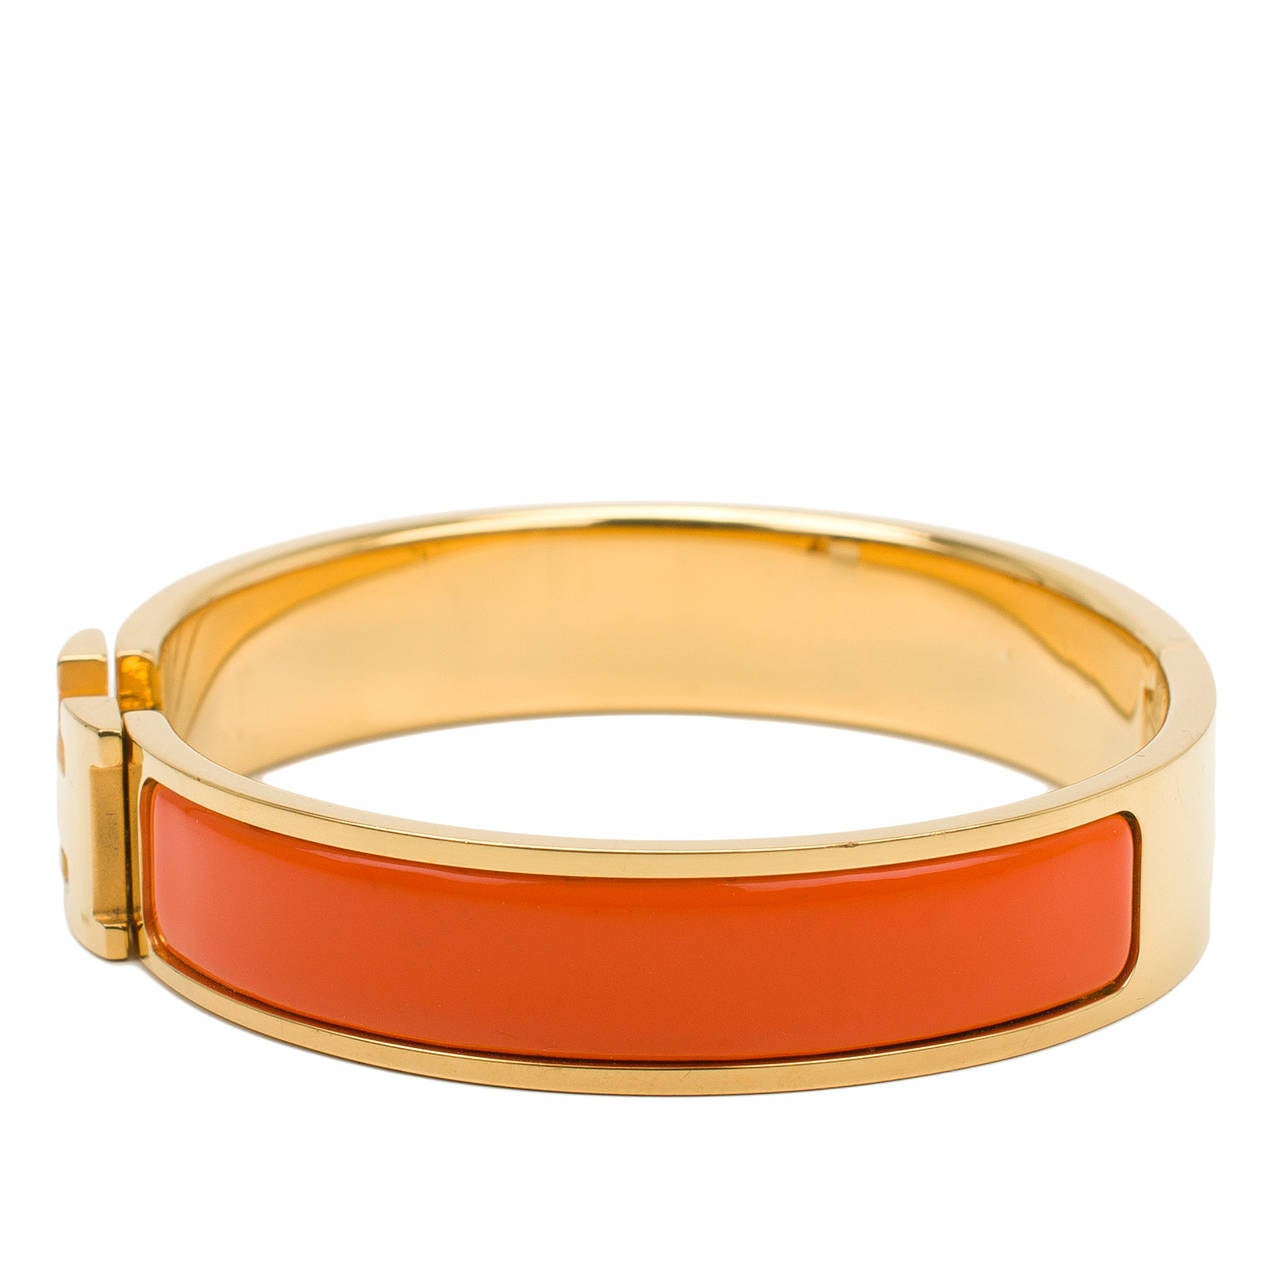 Hermes narrow Clic Clac H bracelet in orange enamel with gold plated hardware in size GM.

Origin: France

Condition: Excellent - minor scratches on hardware; no wear on enamel

Accompanied by: Hermes box and carebook

Measurements: